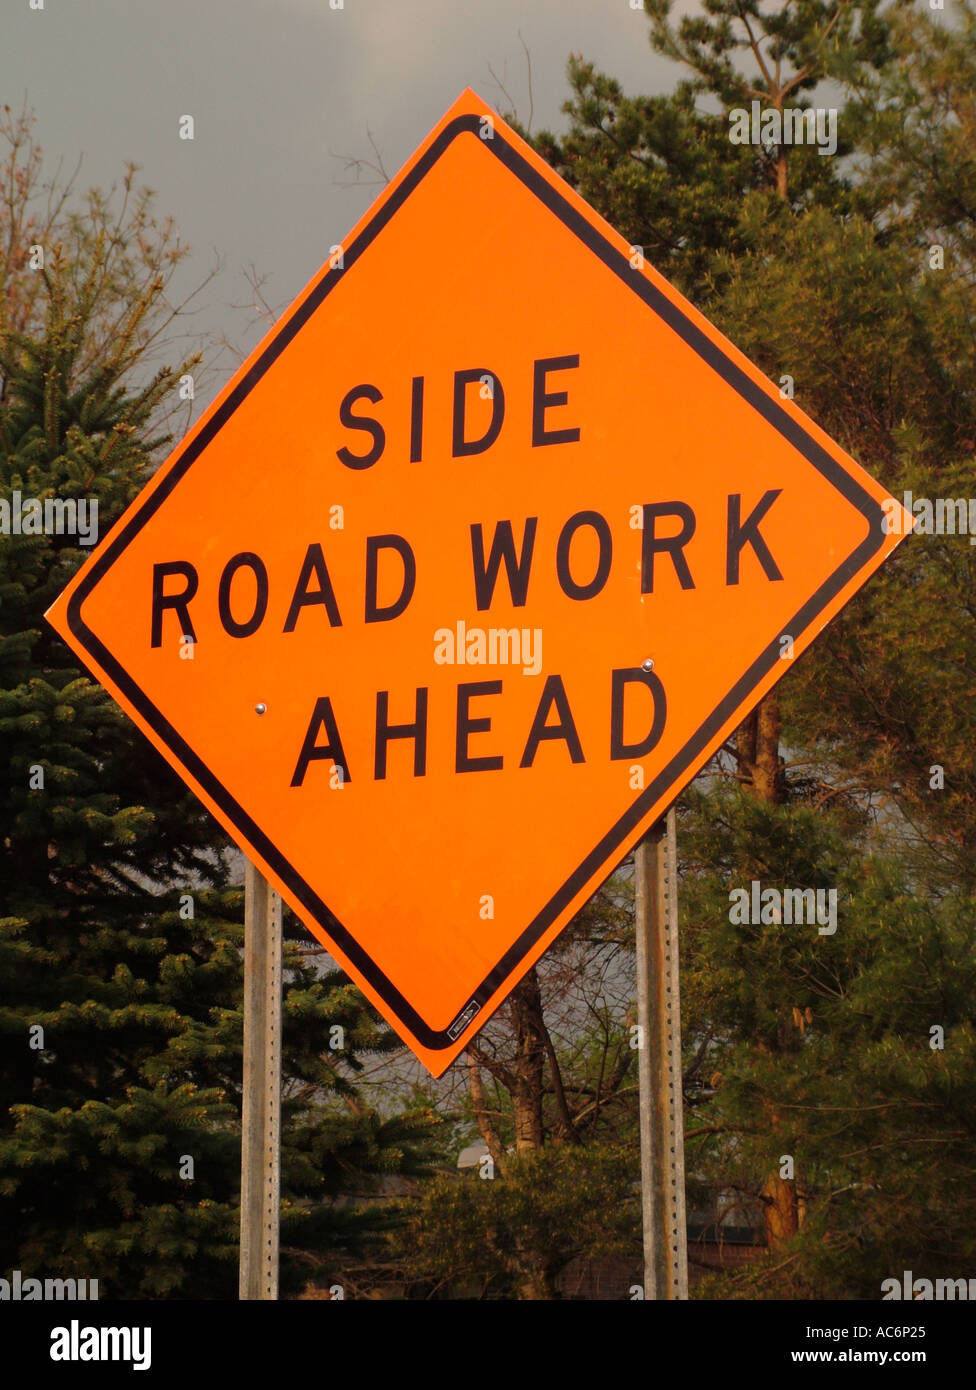 AJD42863, road sign, Side Road Work Ahead Stock Photo